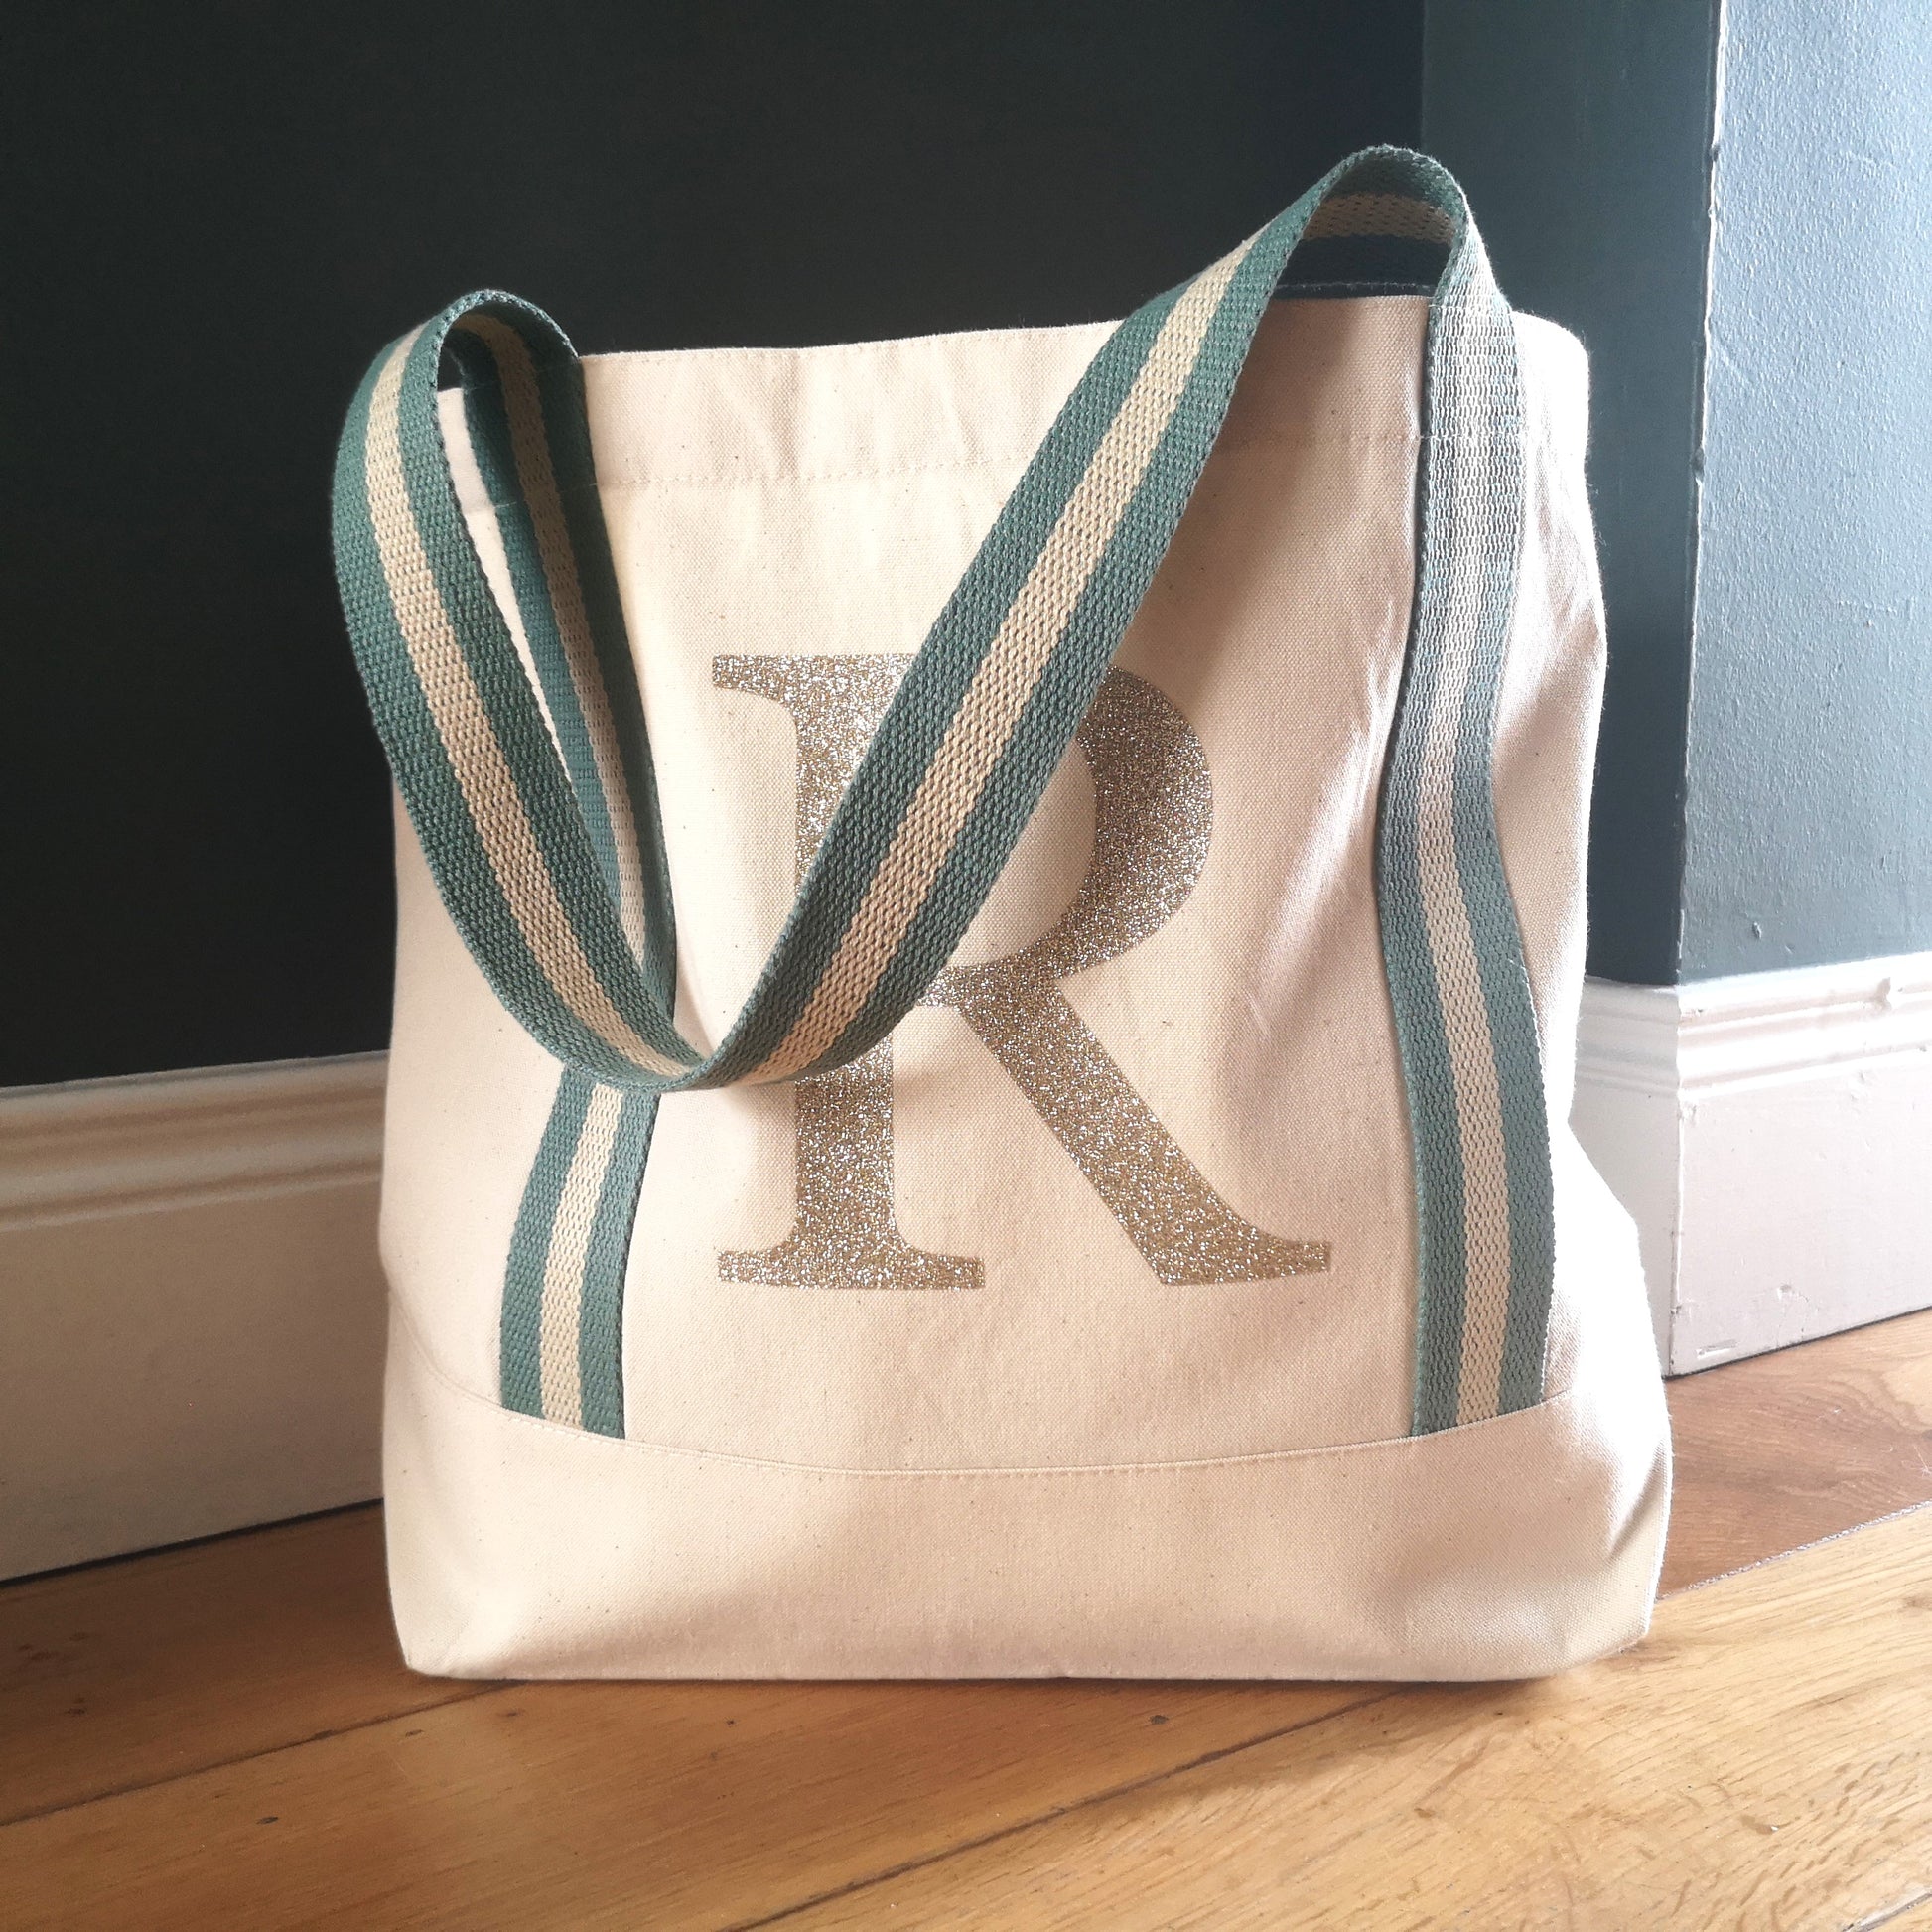 A sturdy natural organic cotton tote with sage green and gold striped straps, and a glittery gold initial on the front in large type